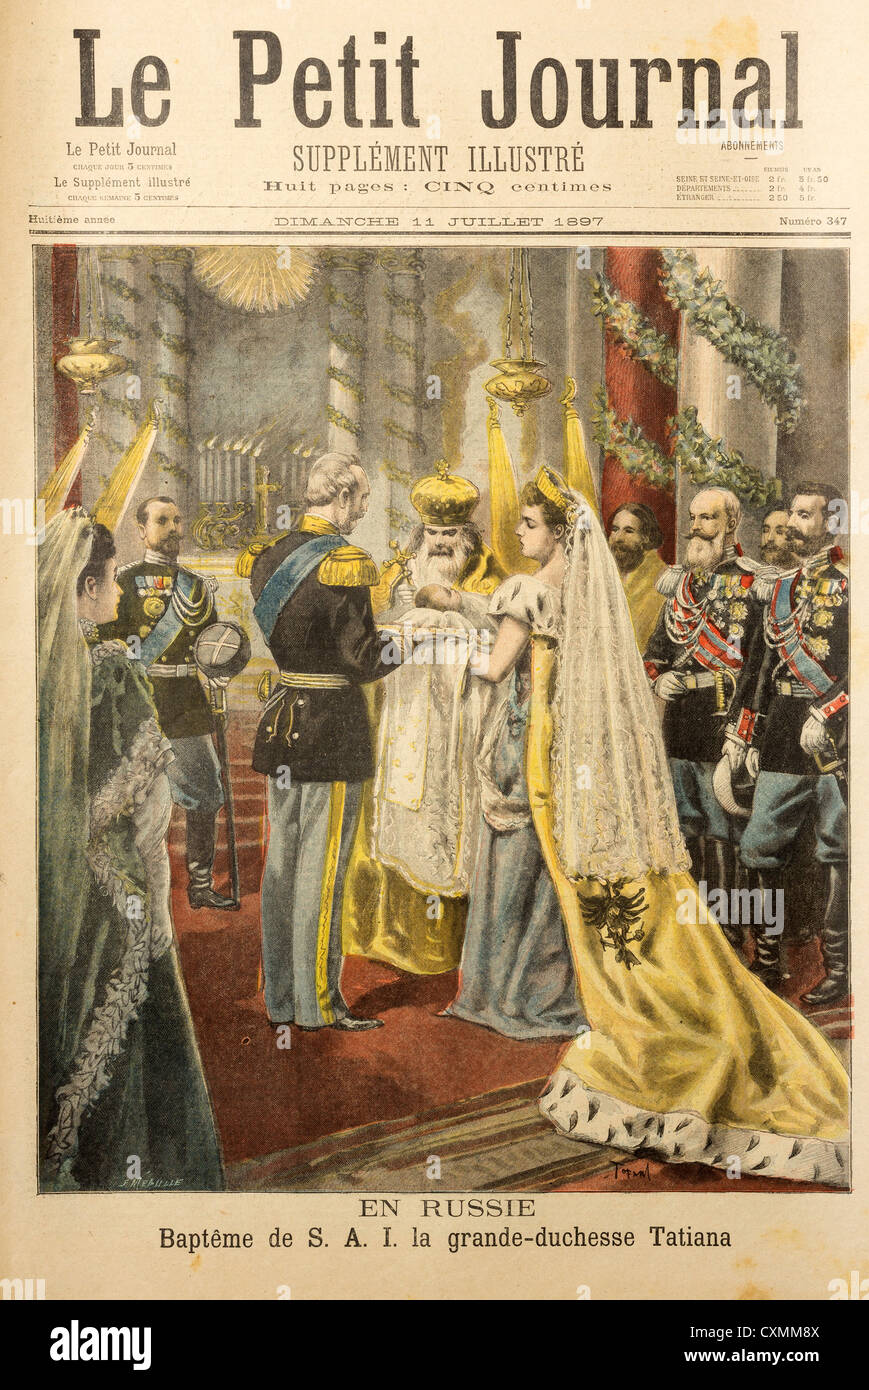 Le Petit Journal cover - Baptism in 1897 of the Grand Duchess Tatiana, daughter of Nicholas II of Russia (all executed in 1918) Stock Photo